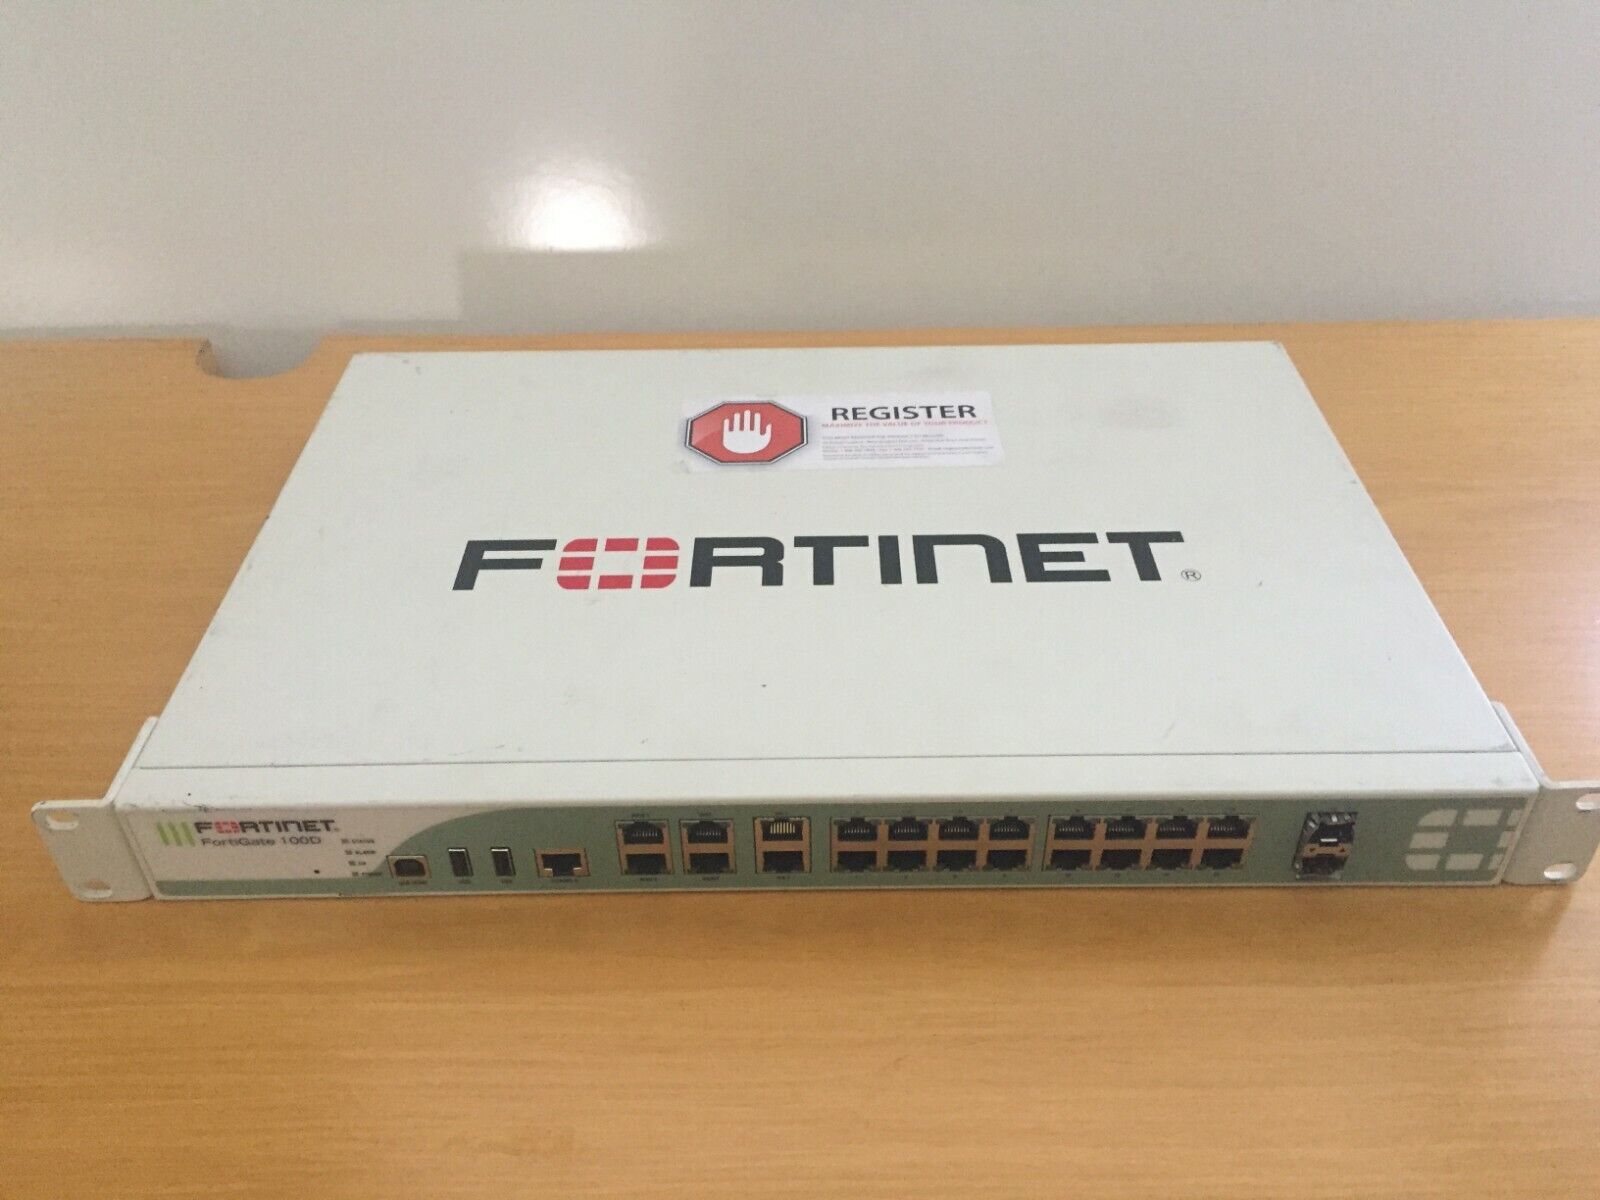 Fortinet FortiGate 100D Security Appliance (FG-100D)